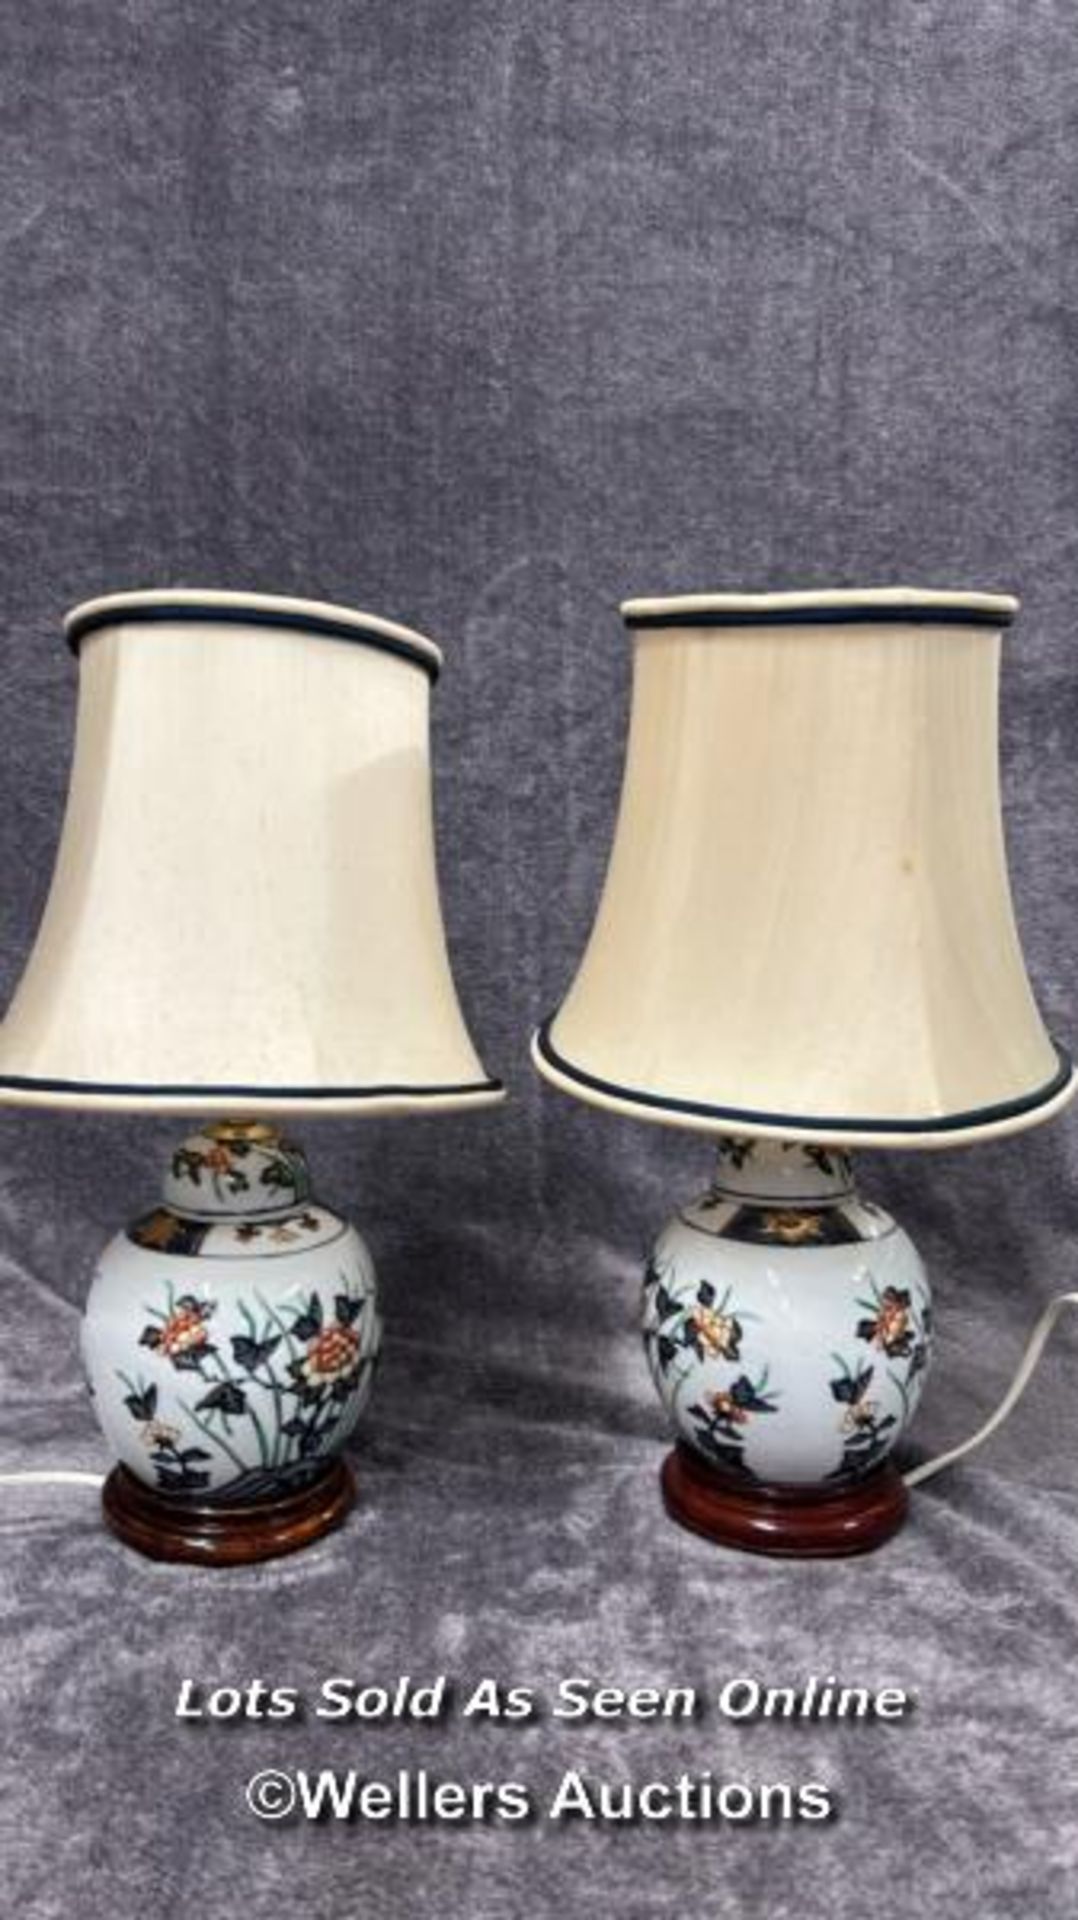 Pair of ceramic table laps, decorated with flowers on wooden base with lamp shades, both need plugs, - Image 4 of 4